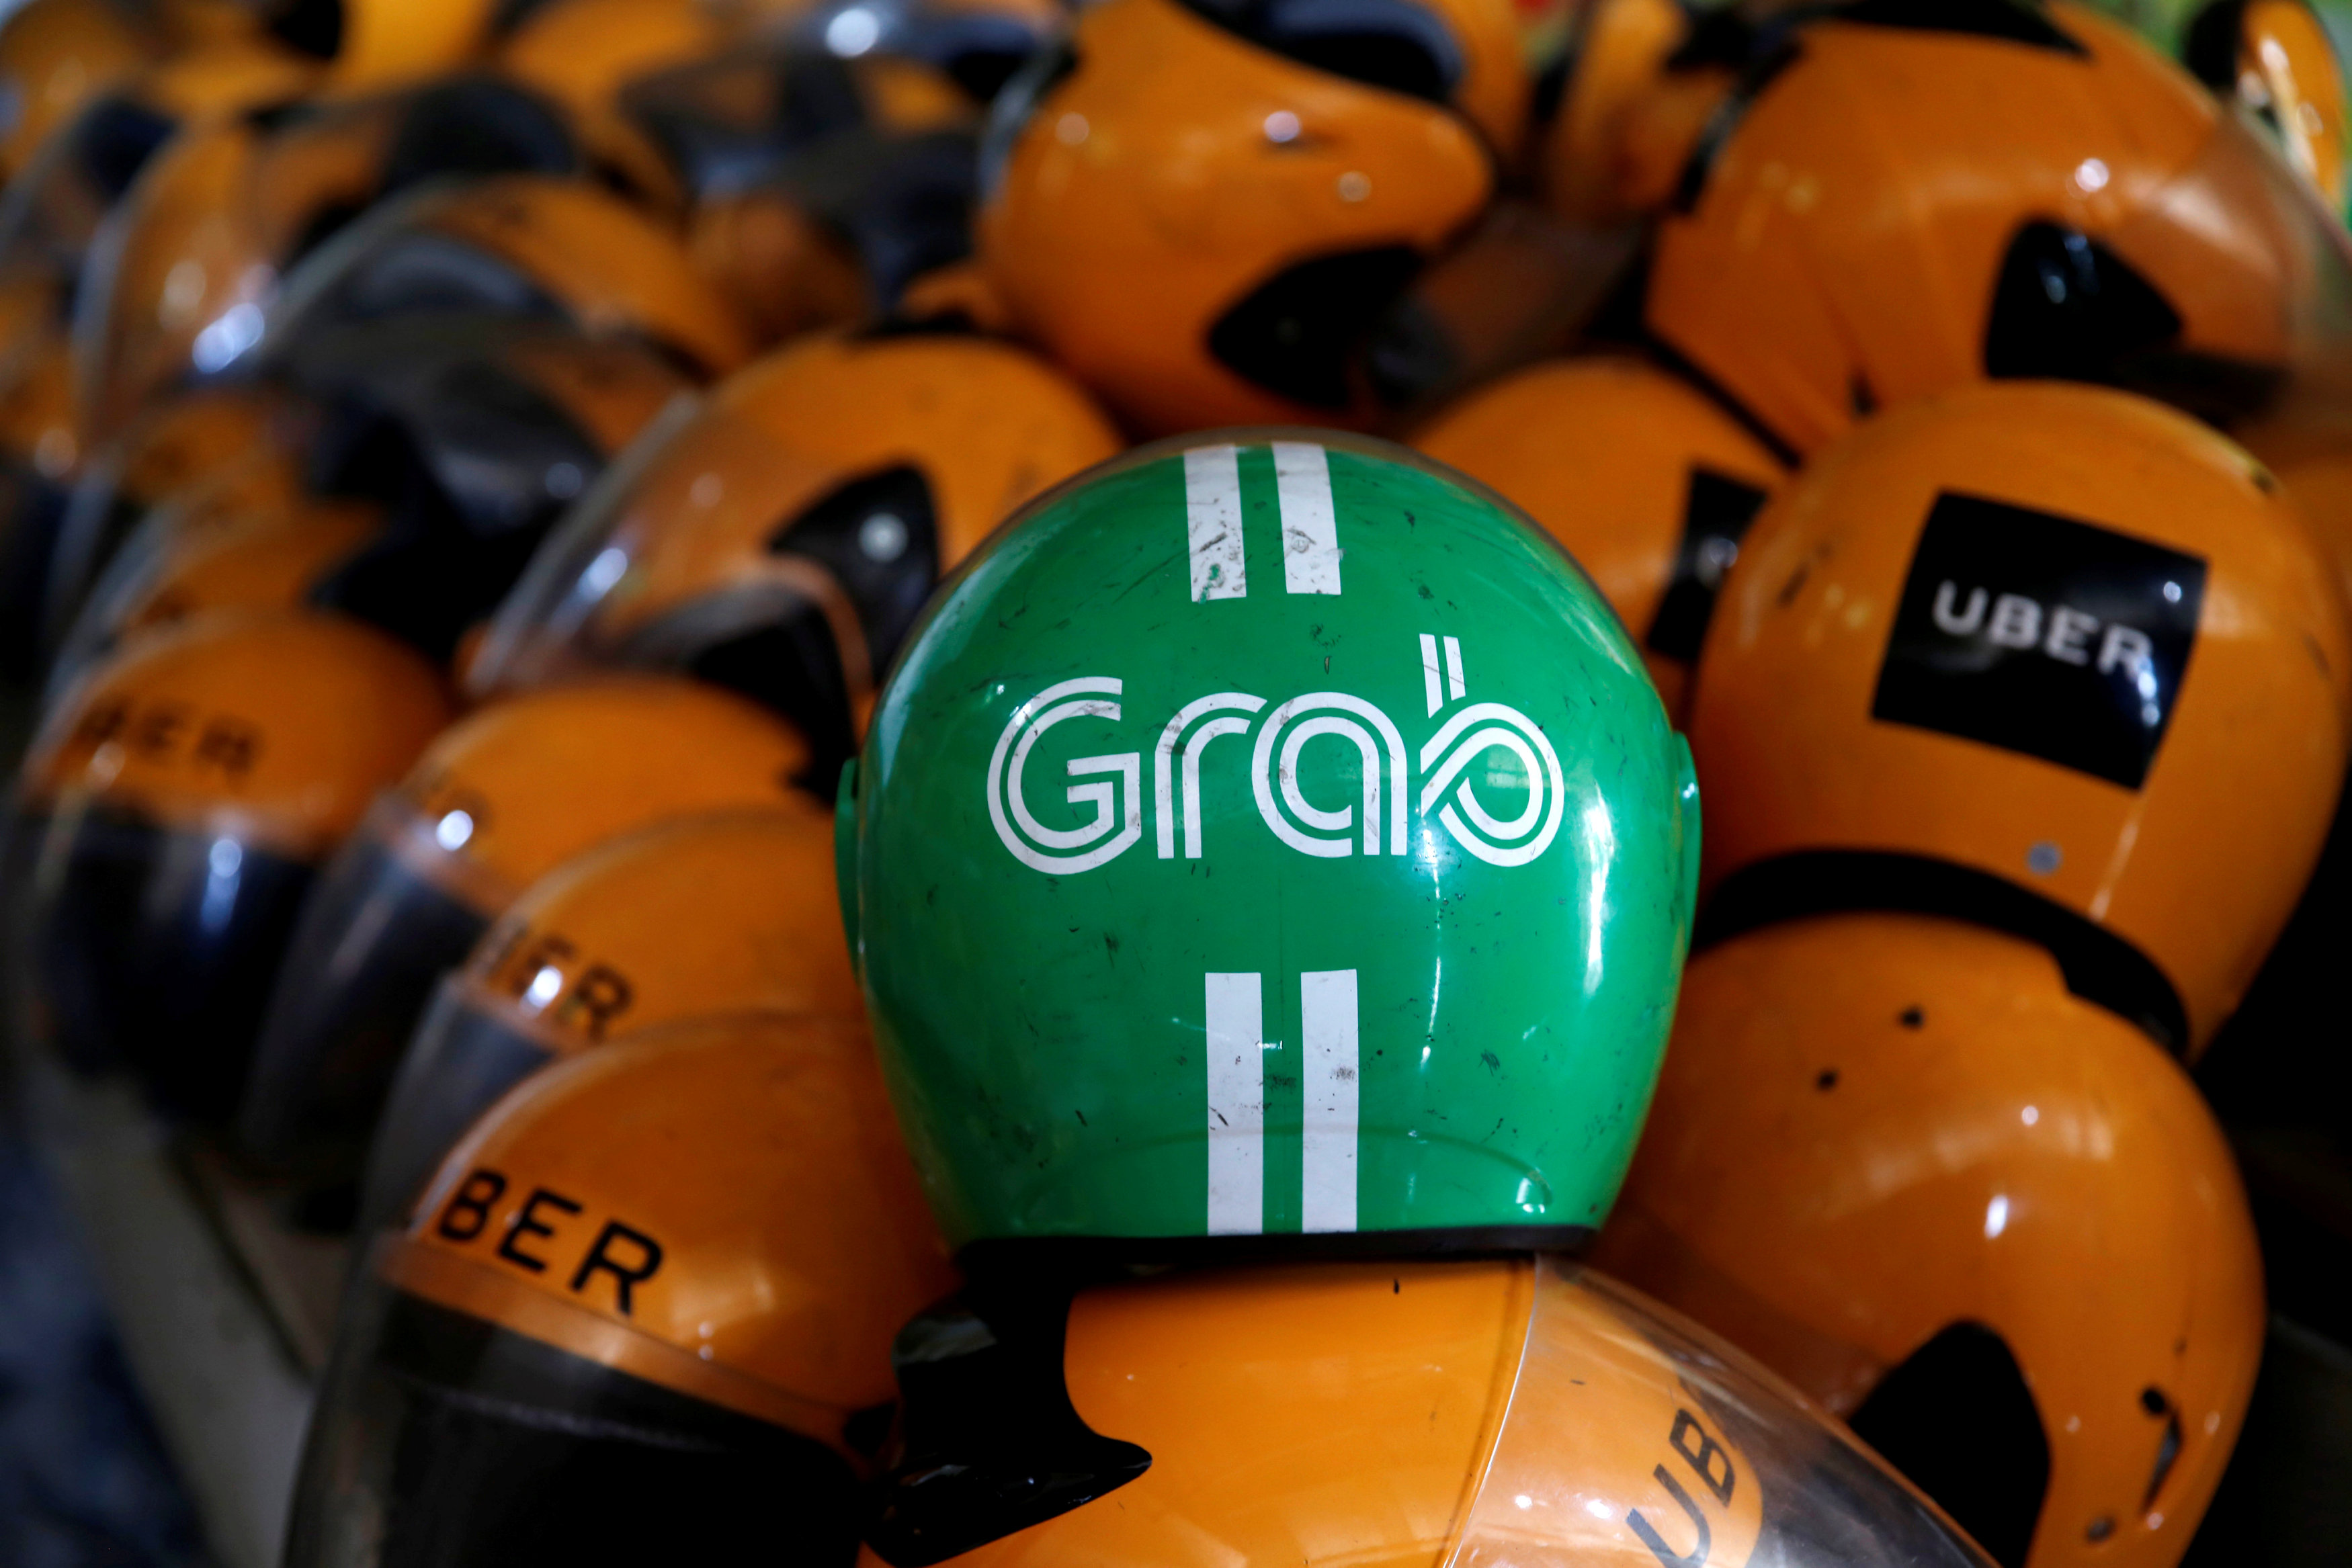 Malaysia to monitor Grab for anti-competition behaviour